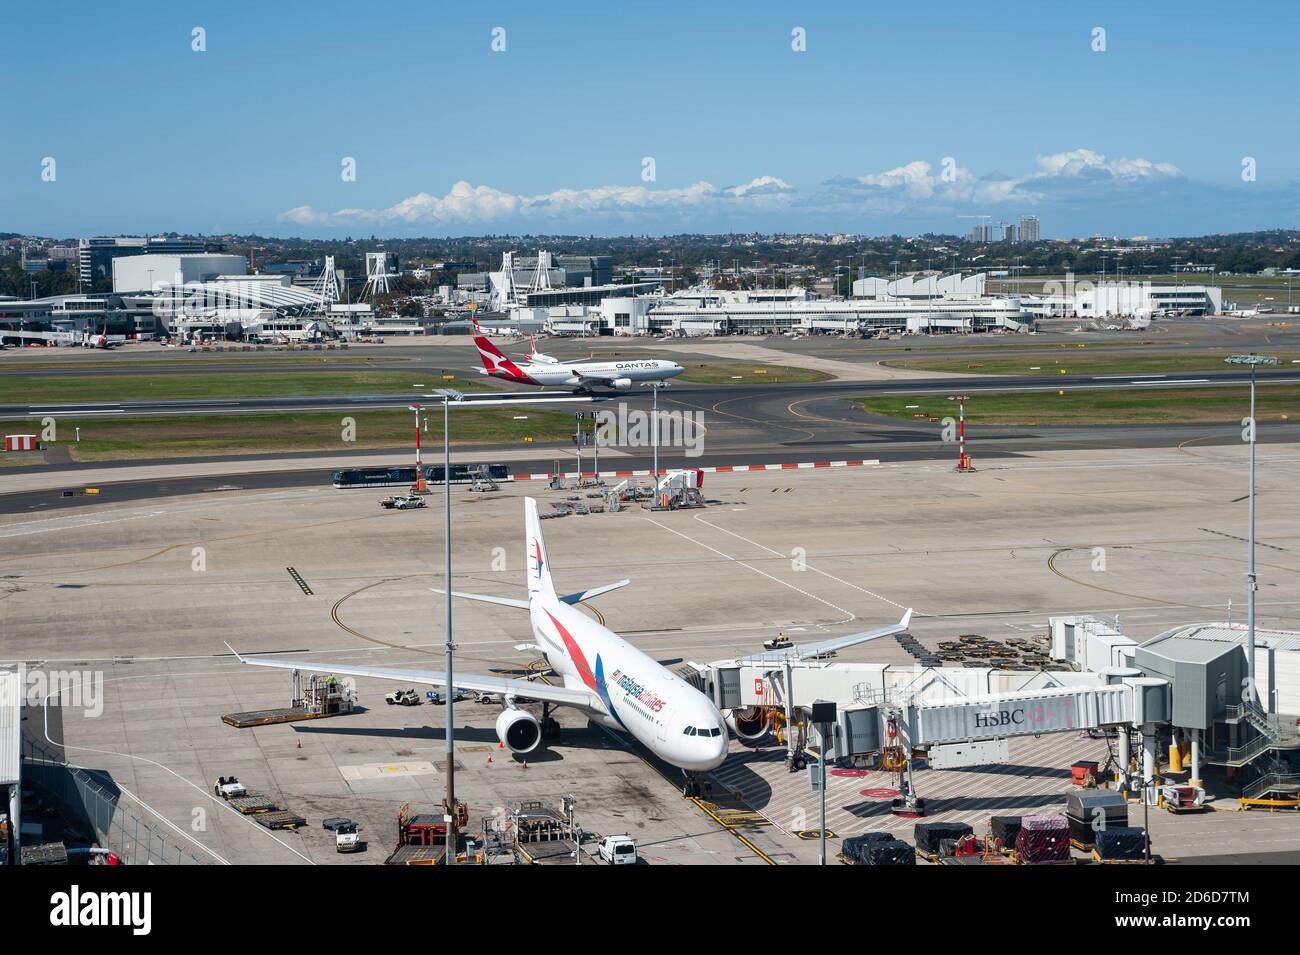 28.09.2019, Sydney, New South Wales, Australia - A Malaysia Airlines Airbus A330-300 passenger aircraft is parked at the gate at Kingsford Smith Inter Stock Photo